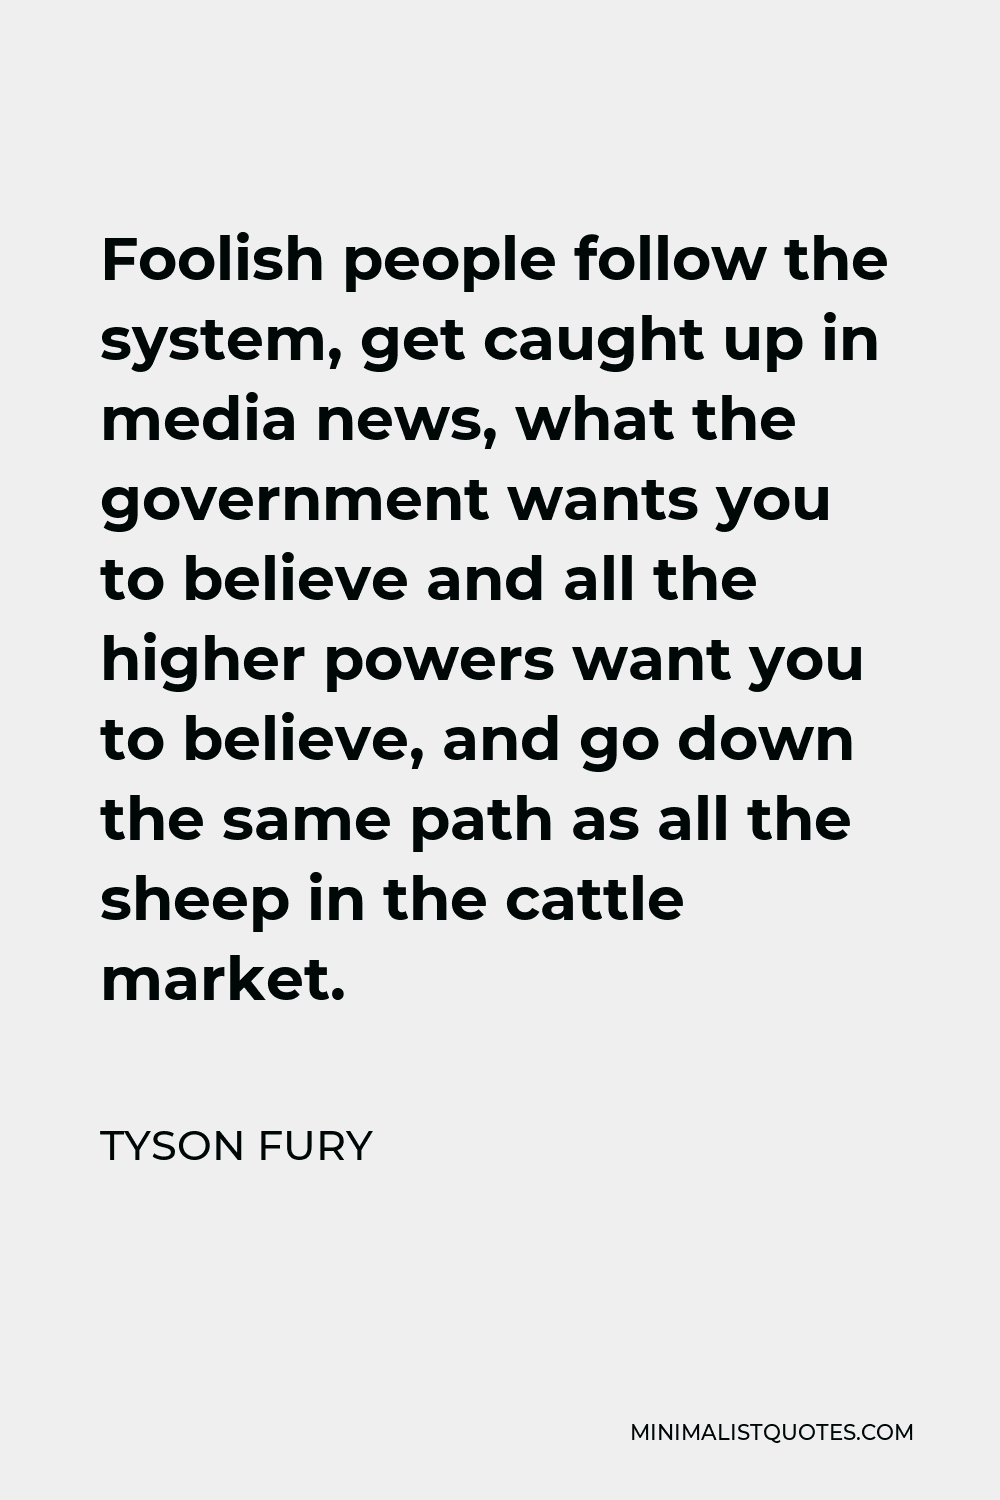 Tyson Fury Quote - Foolish people follow the system, get caught up in media news, what the government wants you to believe and all the higher powers want you to believe, and go down the same path as all the sheep in the cattle market.